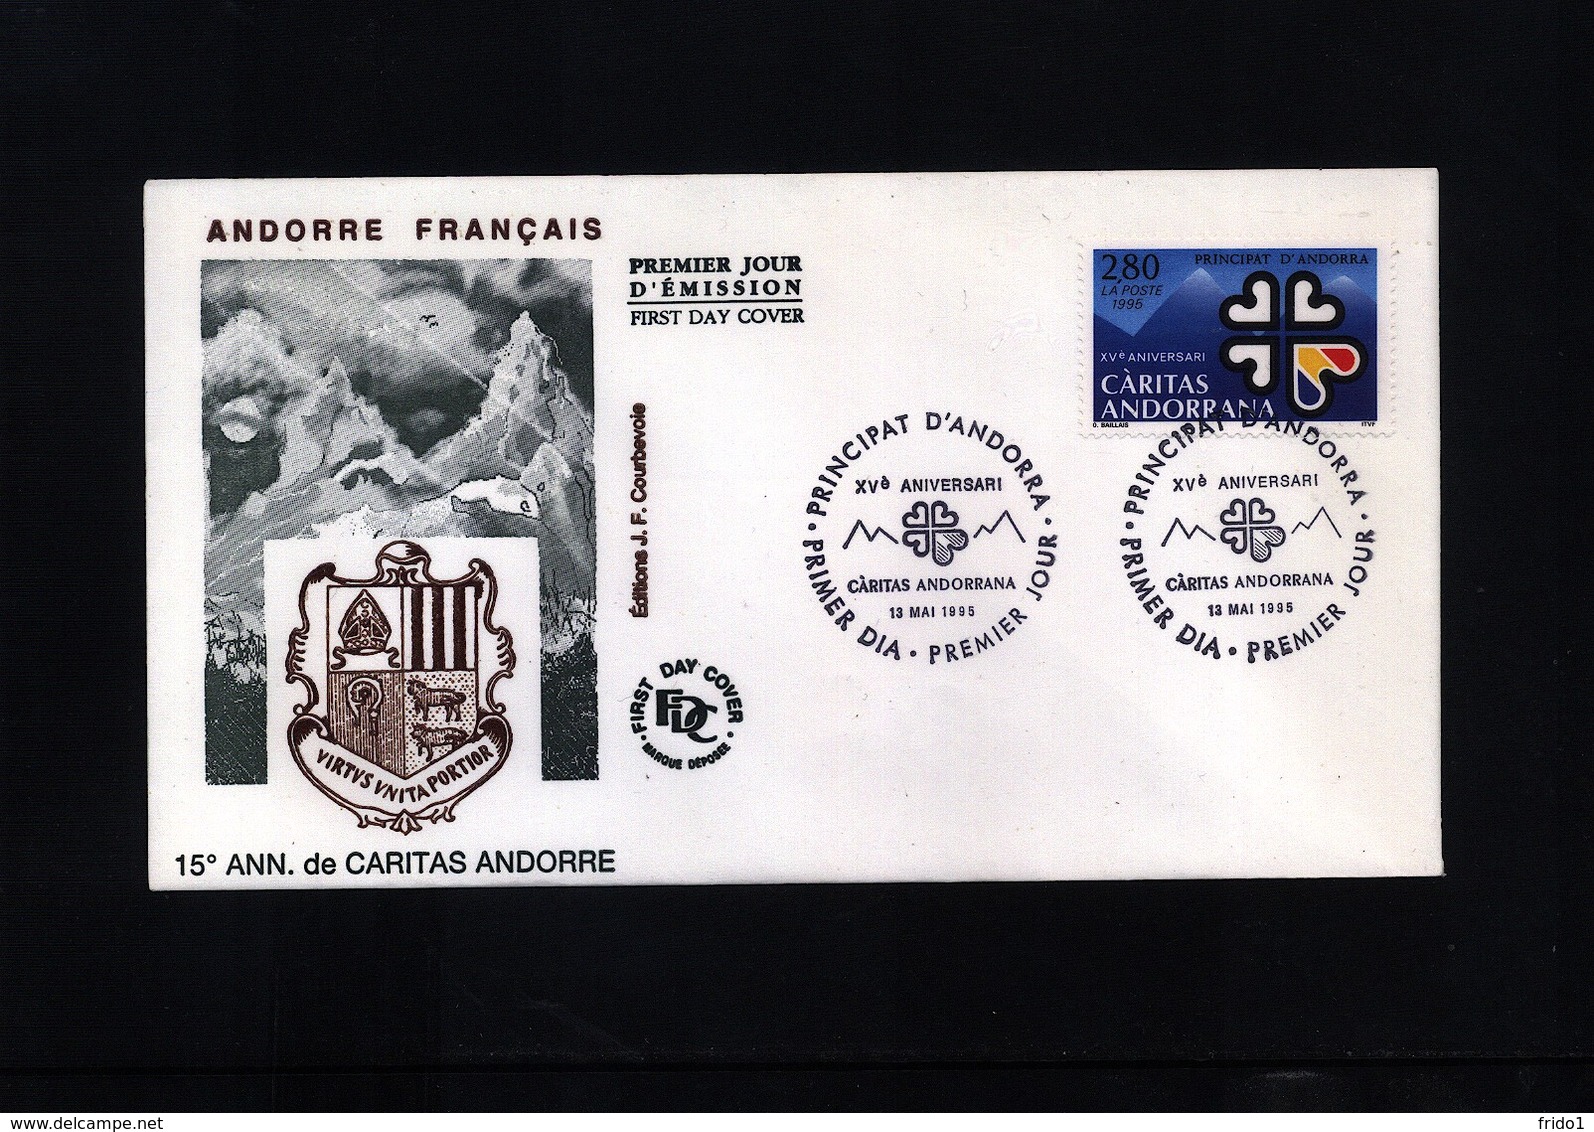 Andorra French 1995 Michel 479 FDC - Covers & Documents